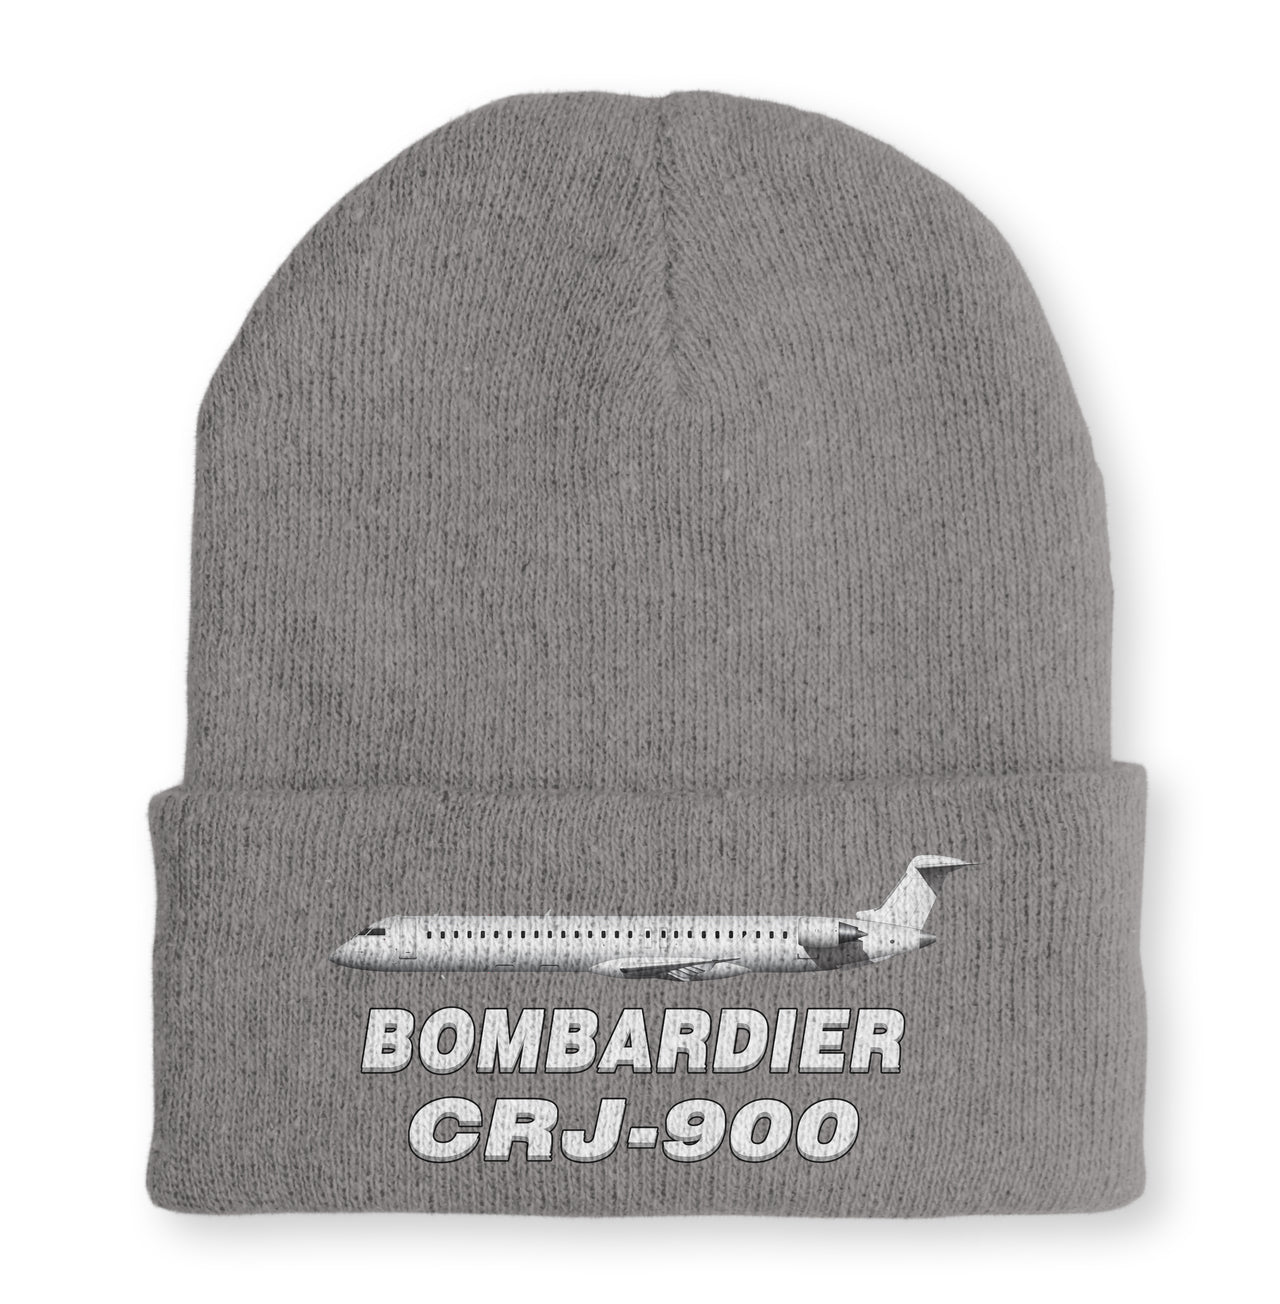 Bombardier CRJ-900 Embroidered Beanies